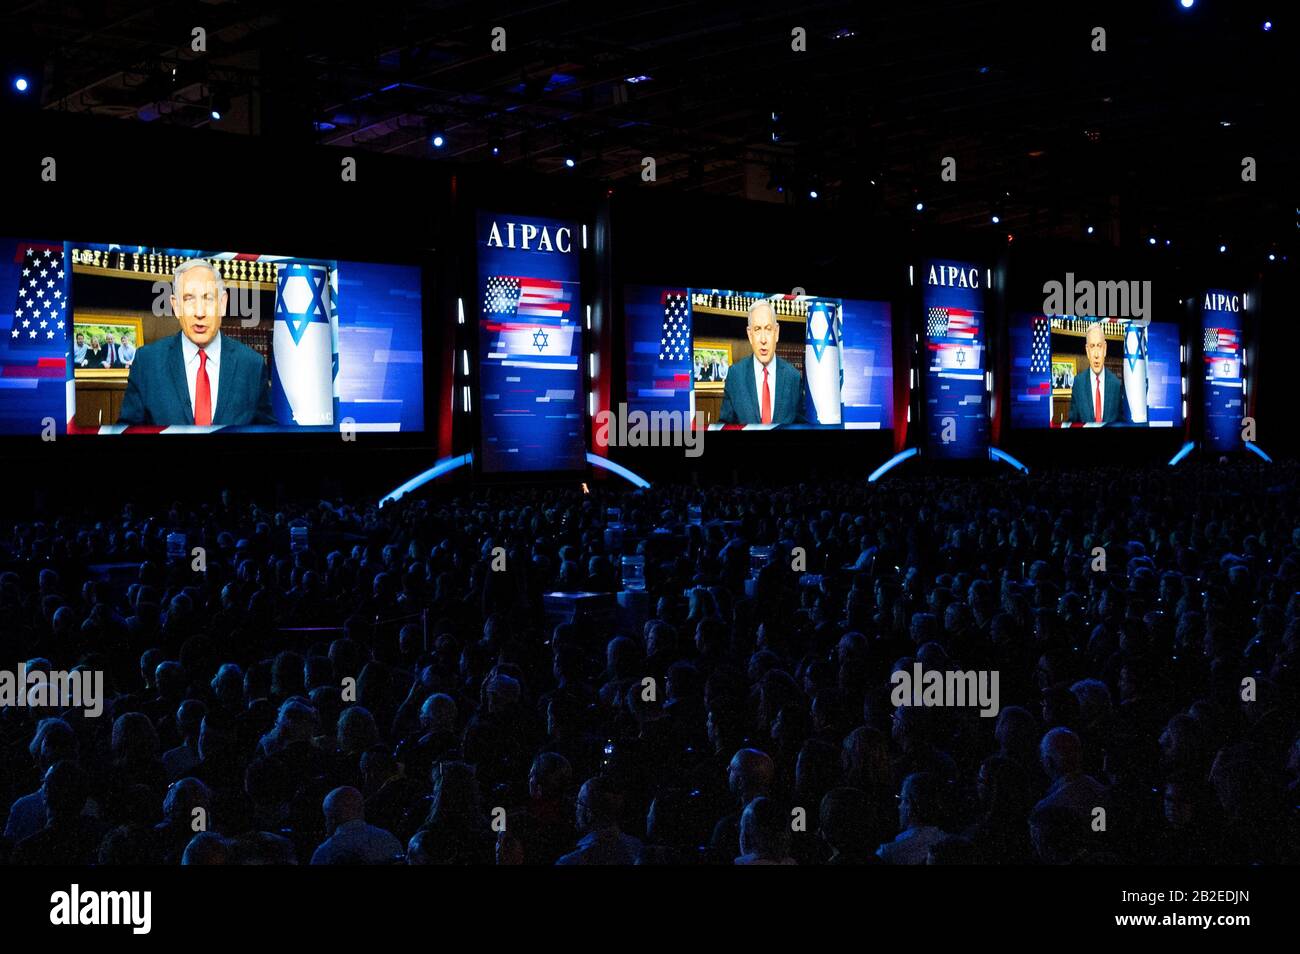 Washington, DC, USA. 1st Mar, 2020. March 1, 2020 - Washington, DC, United States: BENJAMIN NETANYAHU, Prime Minister of Israel, speaking live via video at the American Israel Public Affairs Committee Policy Conference. Credit: Michael Brochstein/ZUMA Wire/Alamy Live News Stock Photo